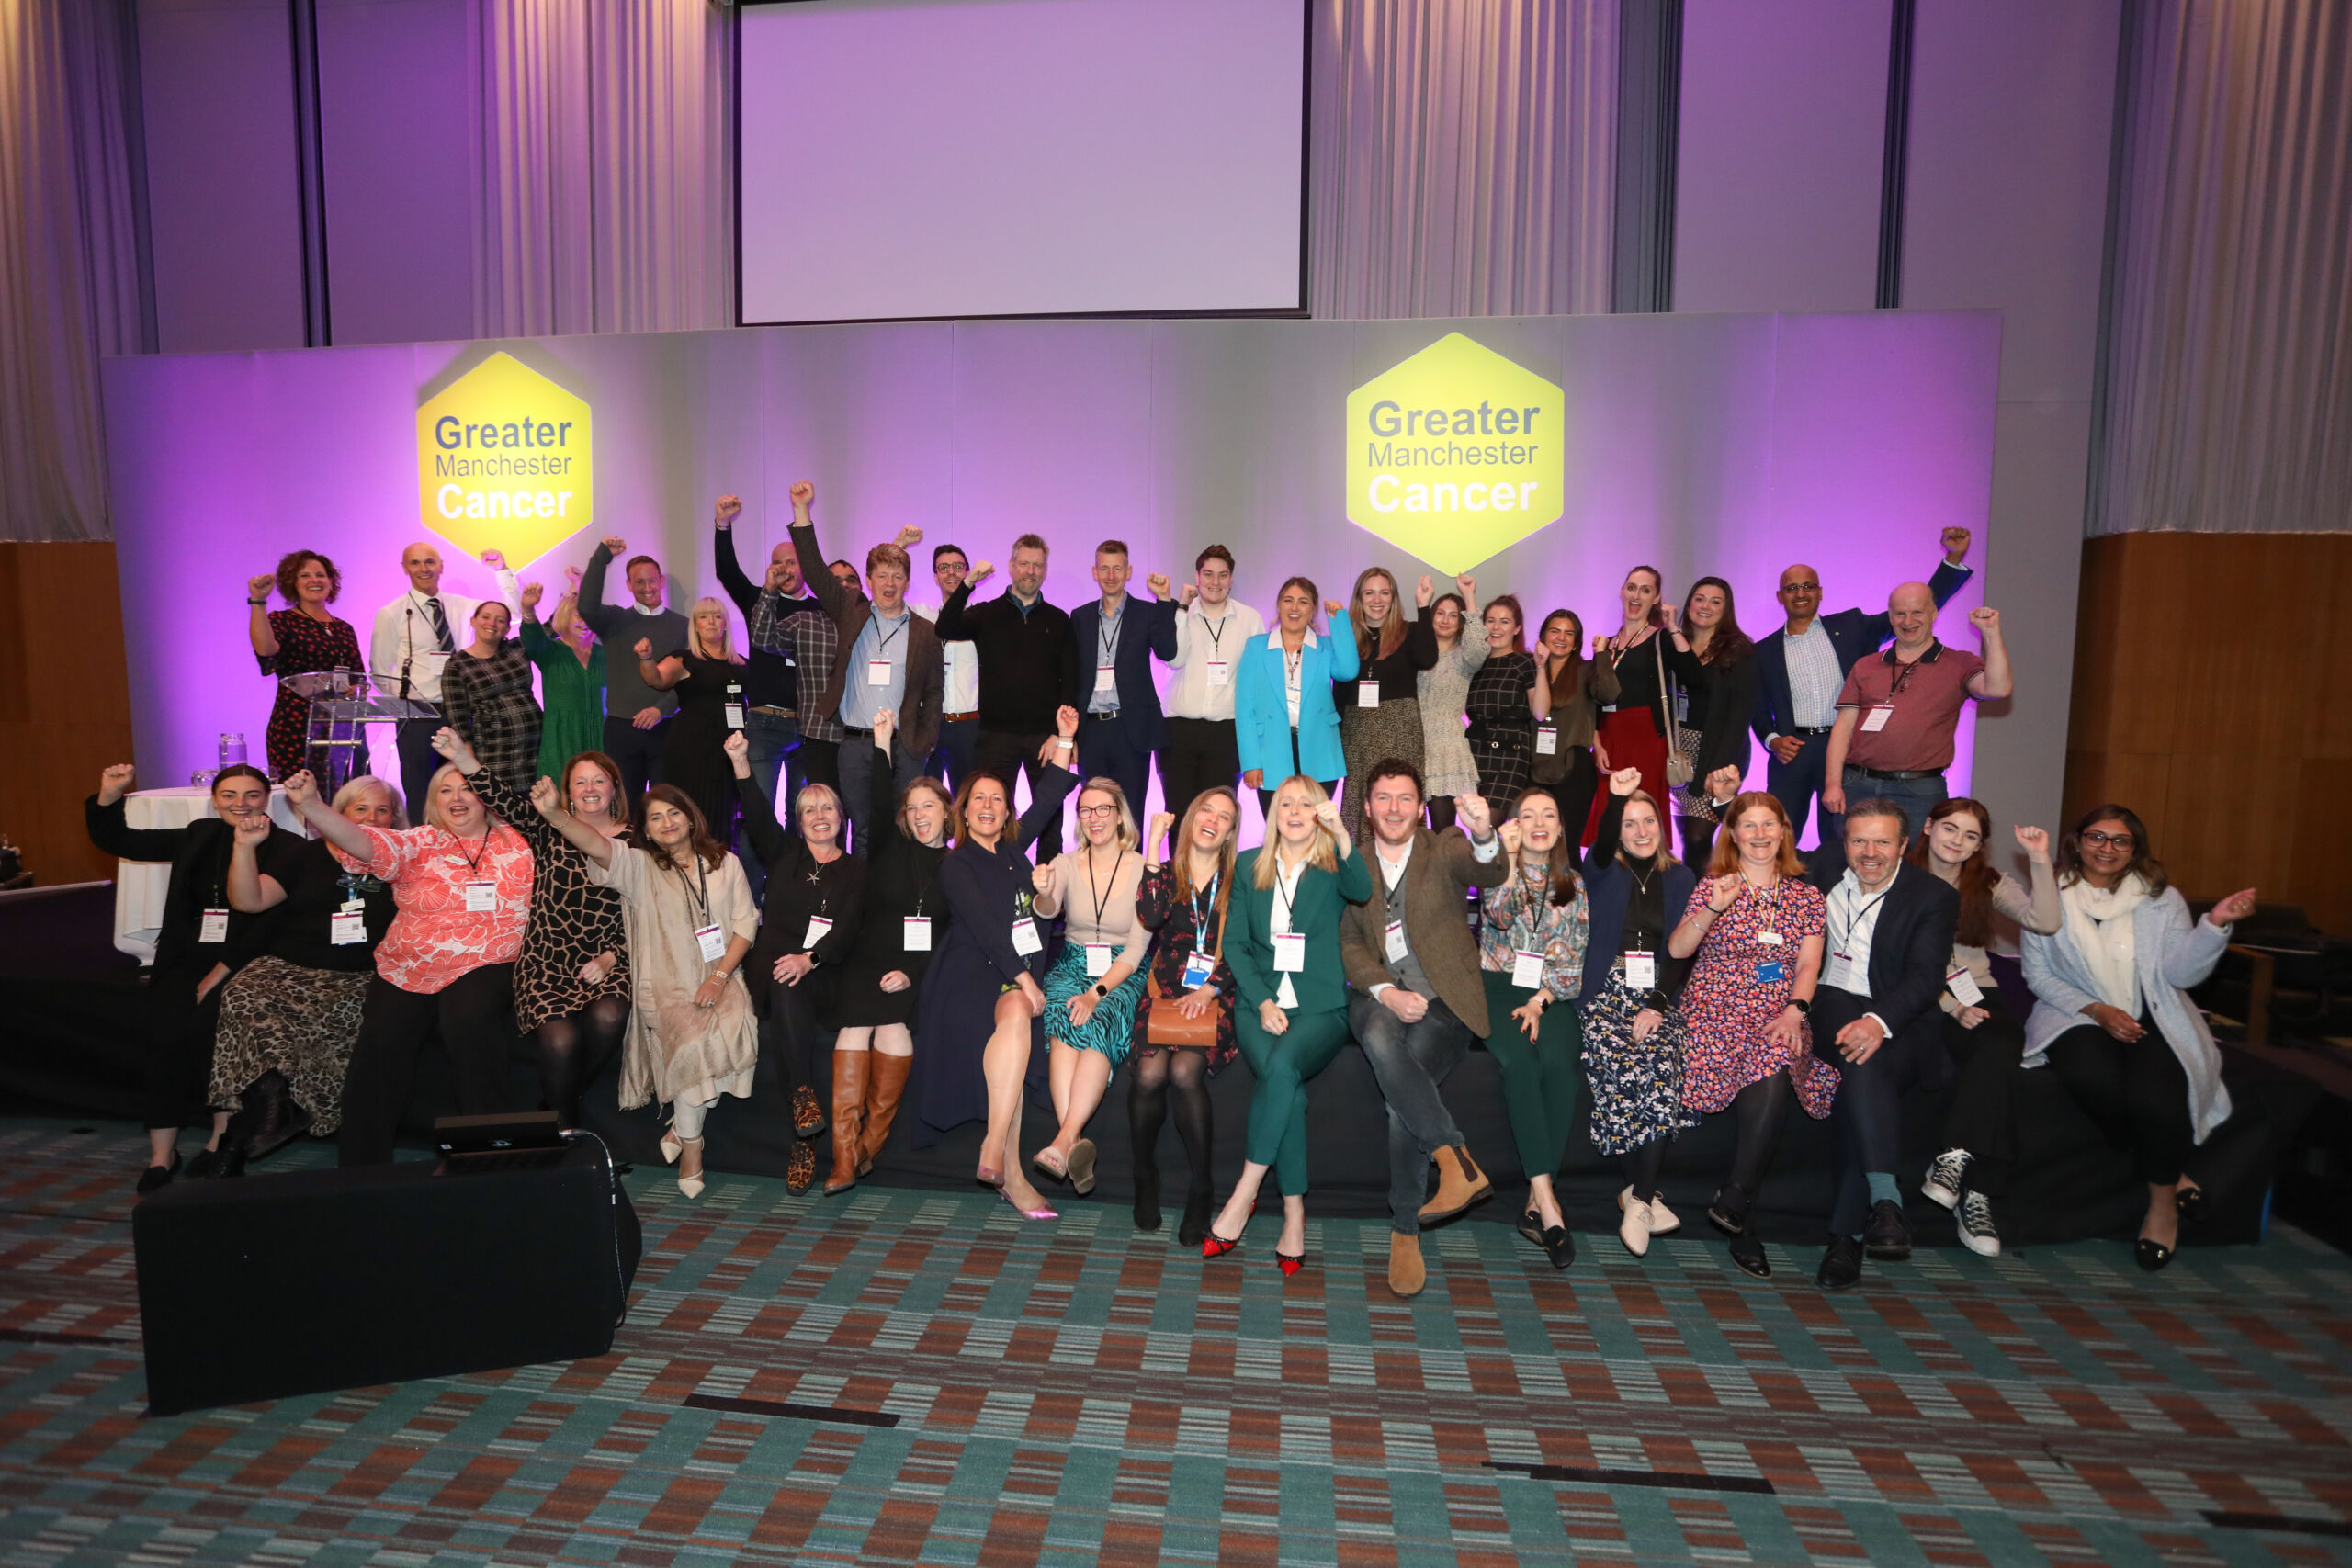 A group of around 40 people stand or sit on the stage at the Greater Manchester Cancer conference and raise their arms and cheer